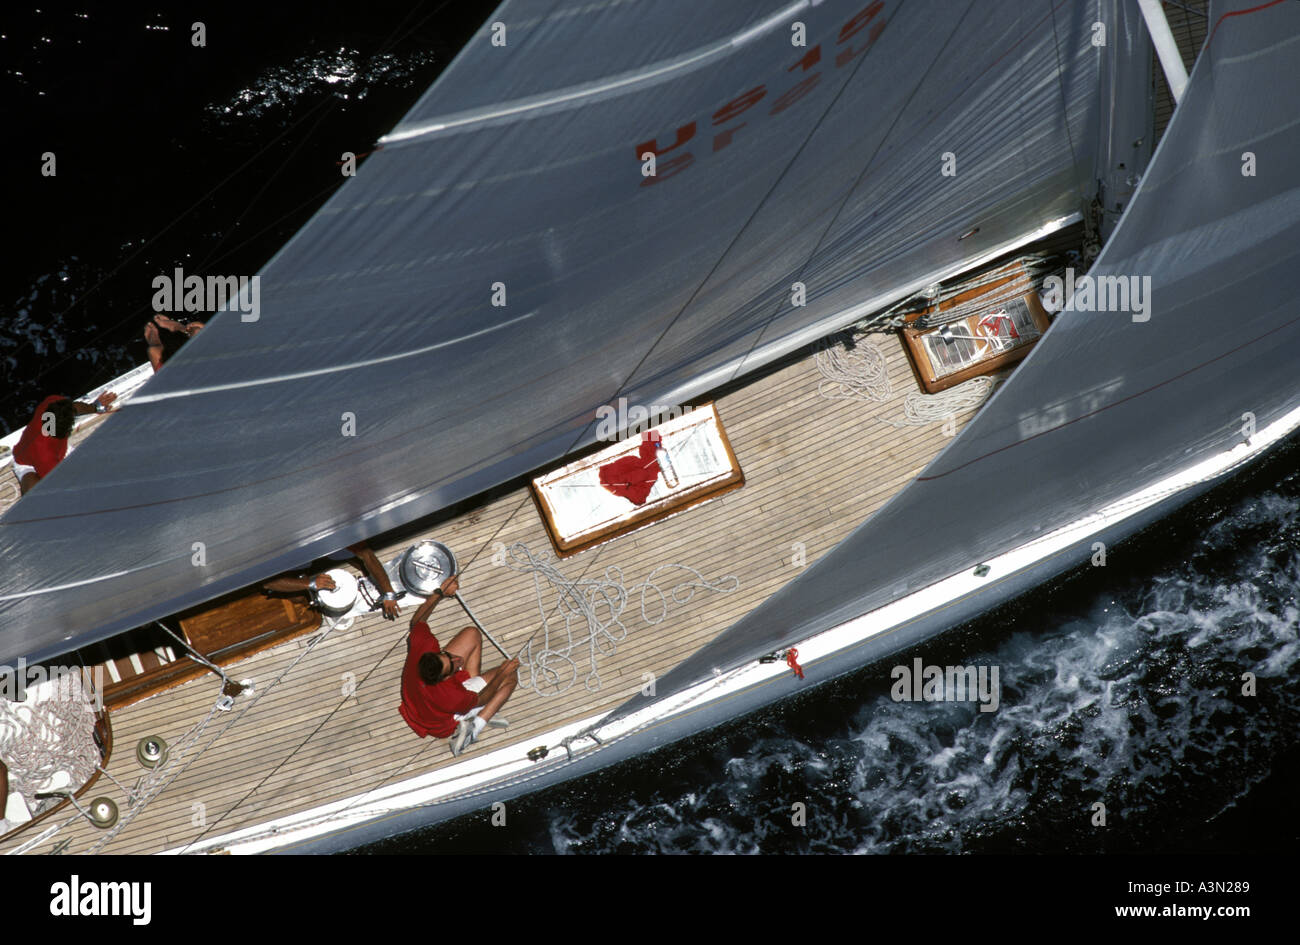 Aerial of genoa trimmer on a classic 12m in St Tropez Stock Photo